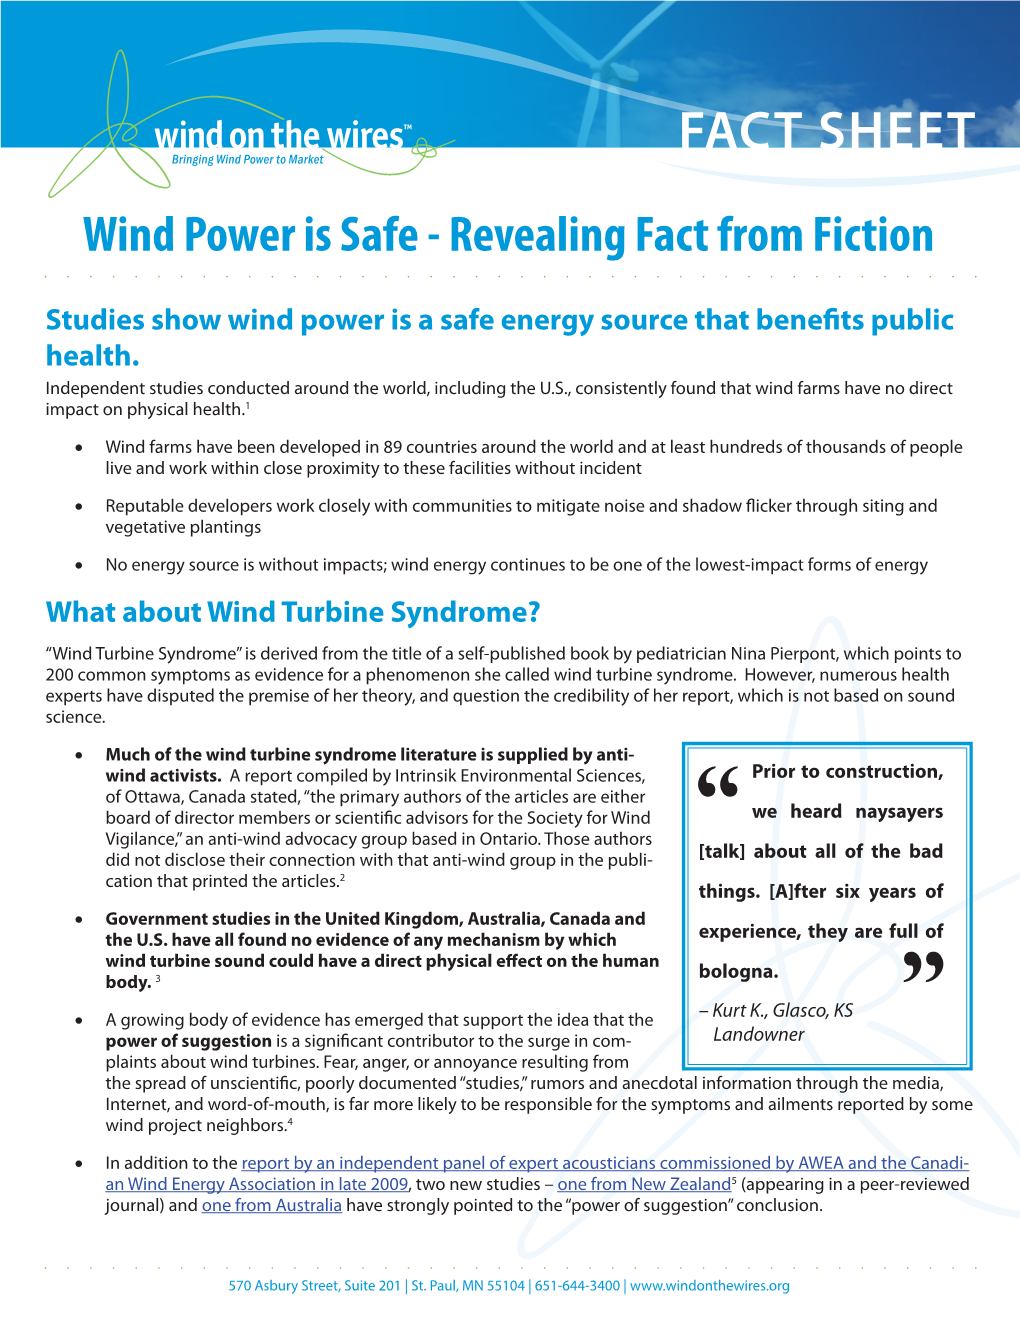 Wind Power Is Safe - Revealing Fact from Fiction